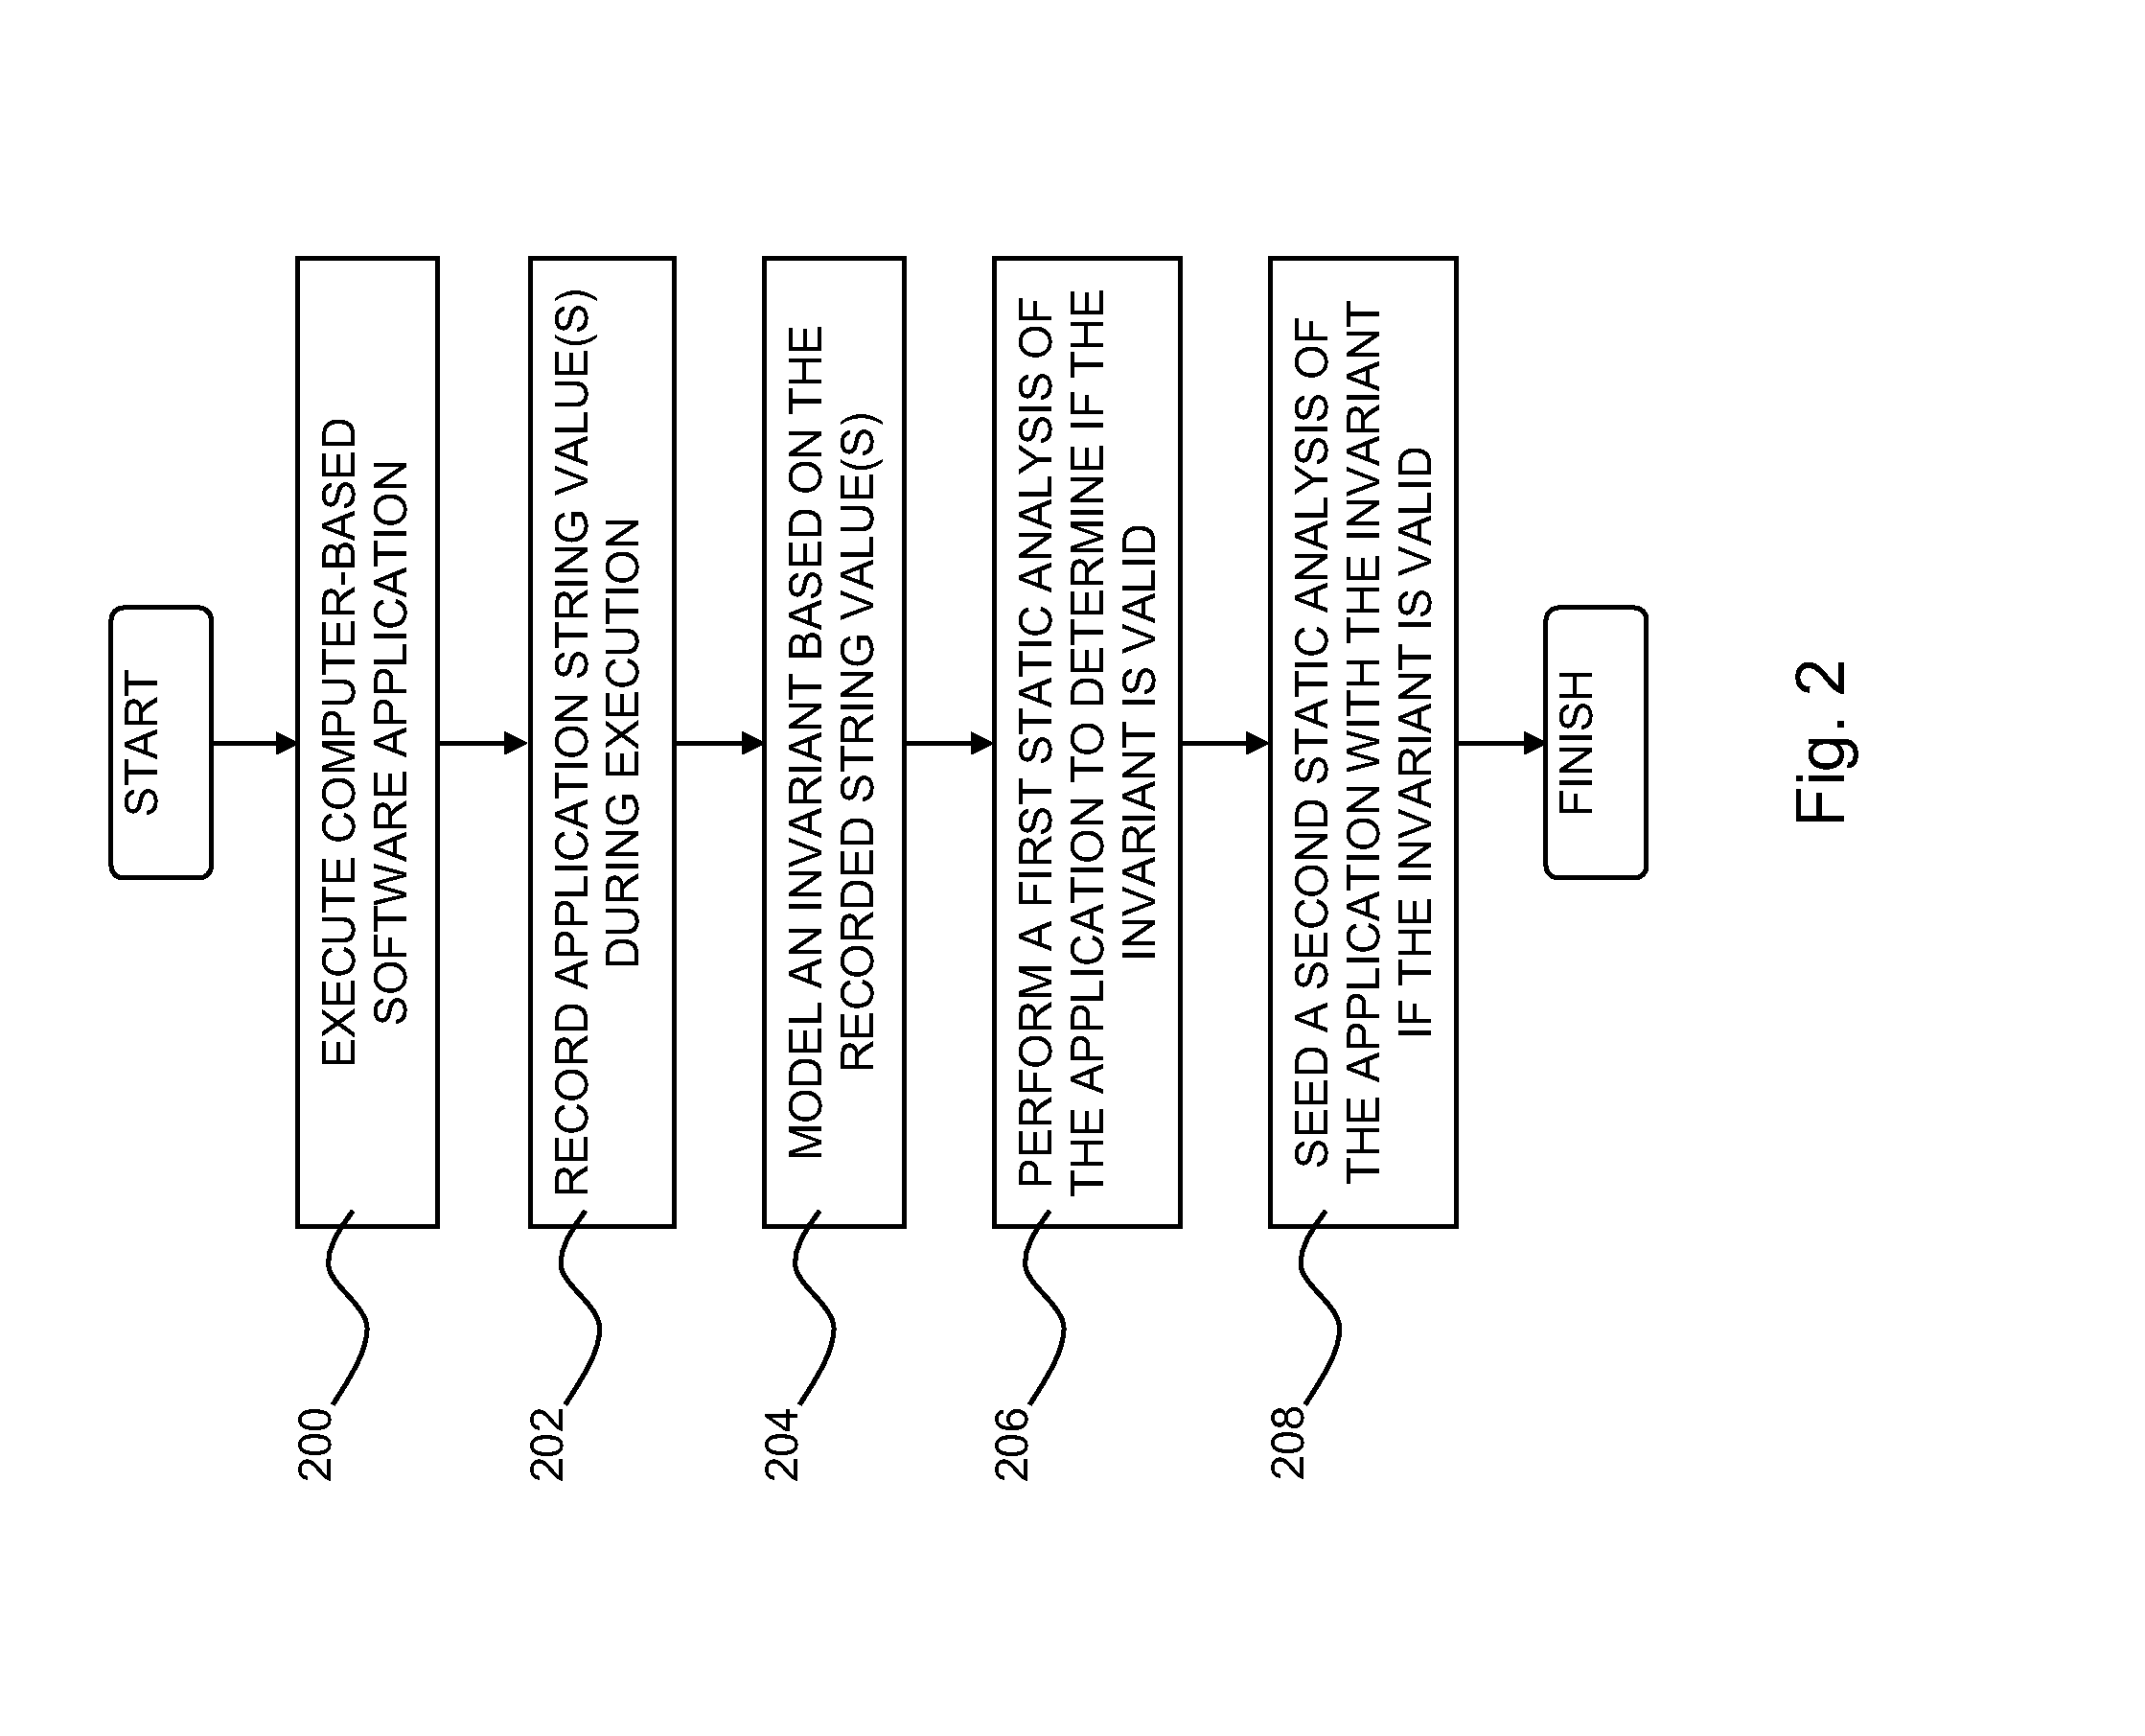 Static analysis based on observed string values during execution of a computer-based software application